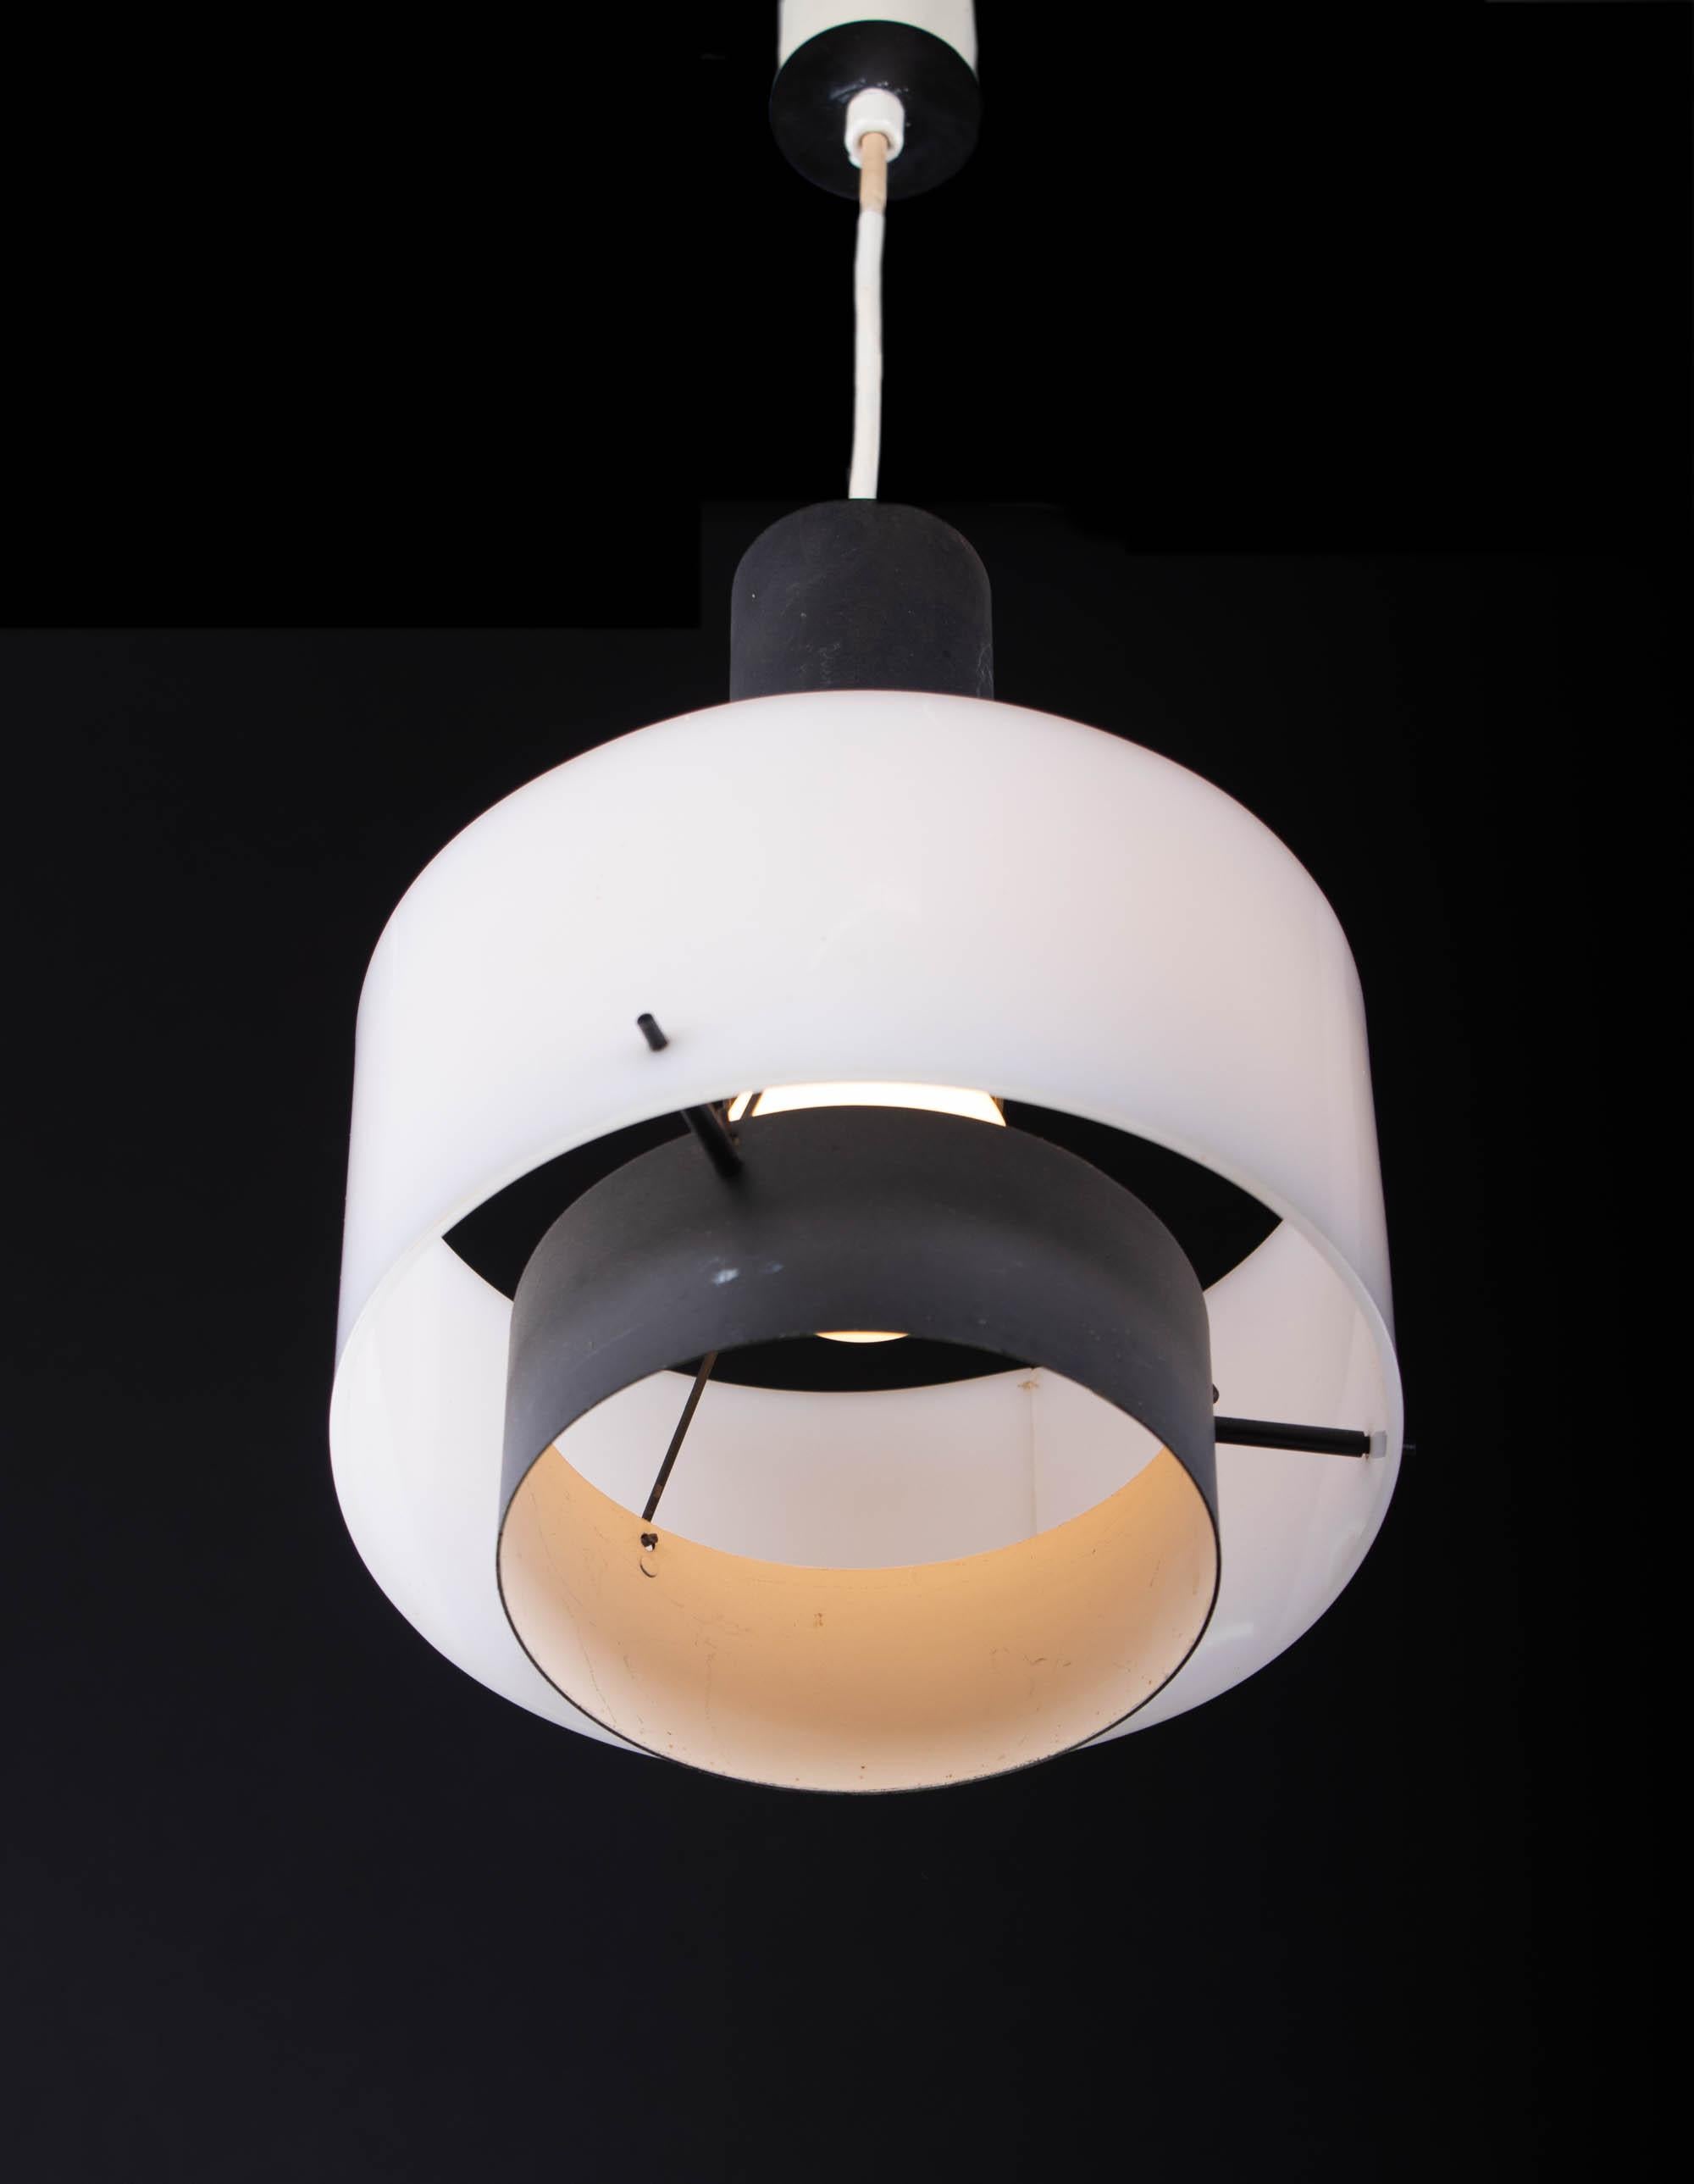 Elegant mid century pendant designed by Gino Sarfatti (attr.) for Arteluce. The lamp is made of a white plastic ring with black metal rods and frame. The lamp emits smooth indirect light downwards. Made in Italy, 1950s. 

Measures: dm 7.87